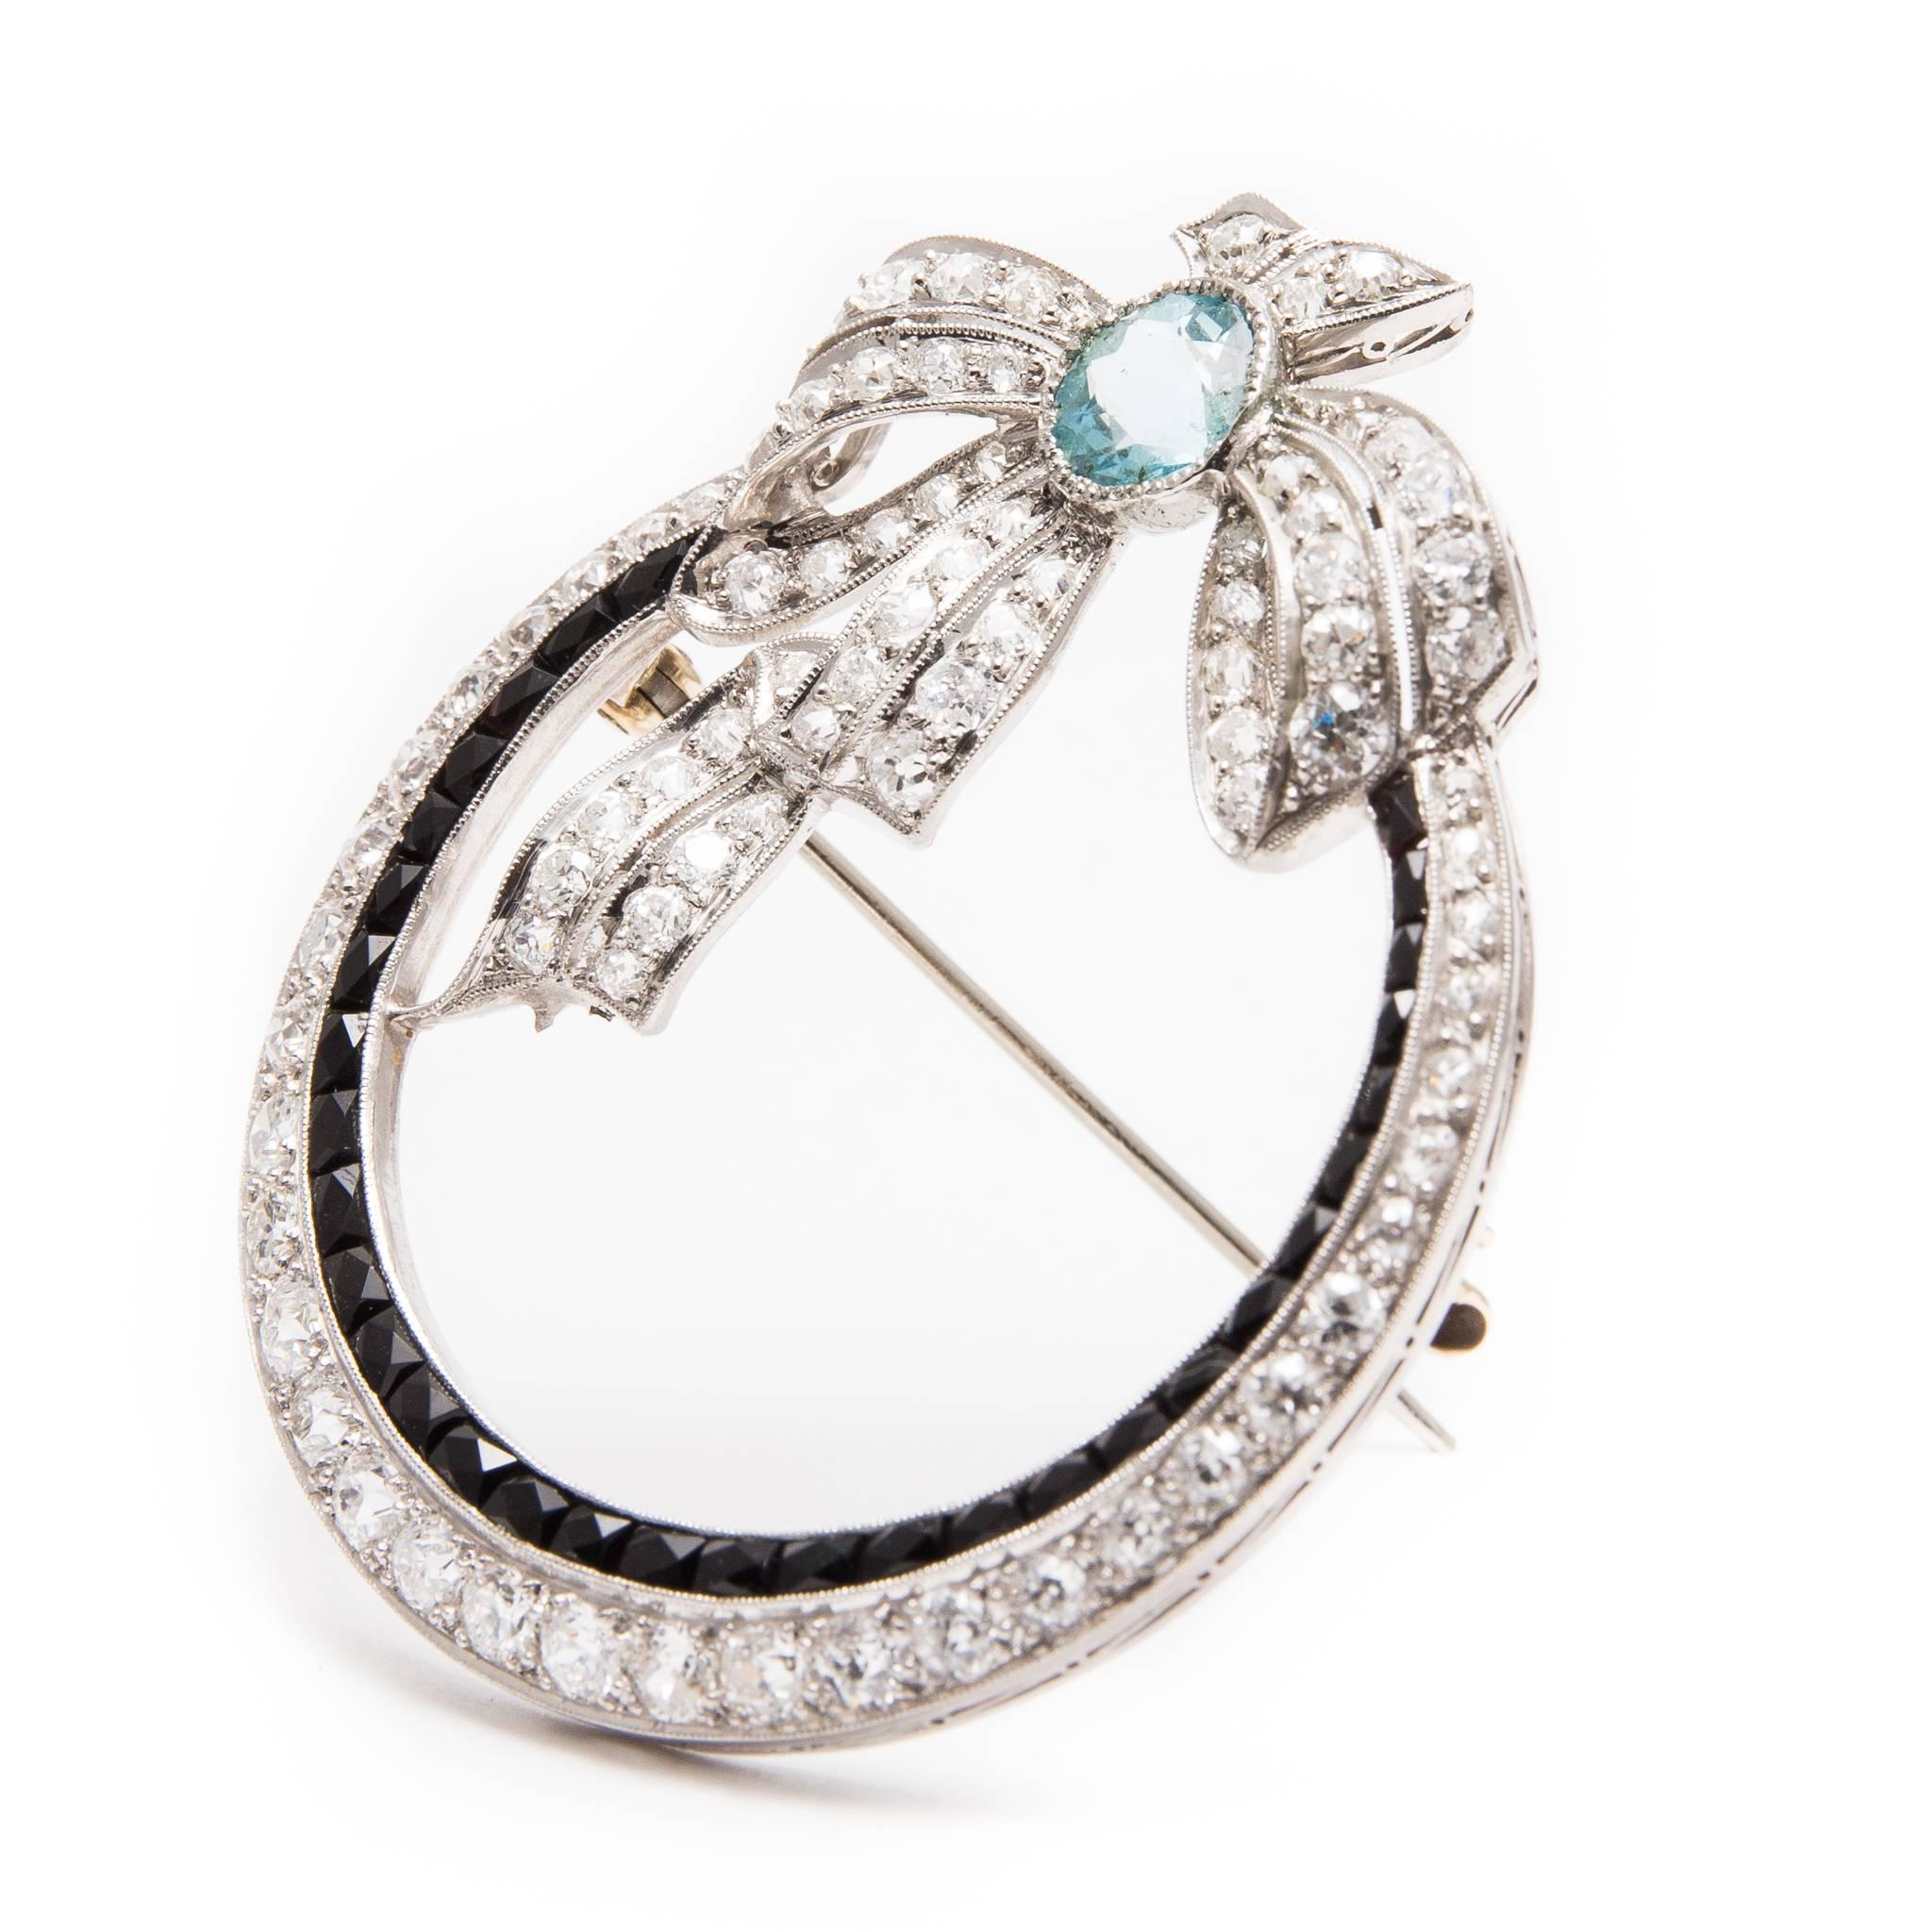 Spectacular Art Deco Aquamarine Diamond and Onyx Brooch in Platinum In Excellent Condition For Sale In Boston, MA